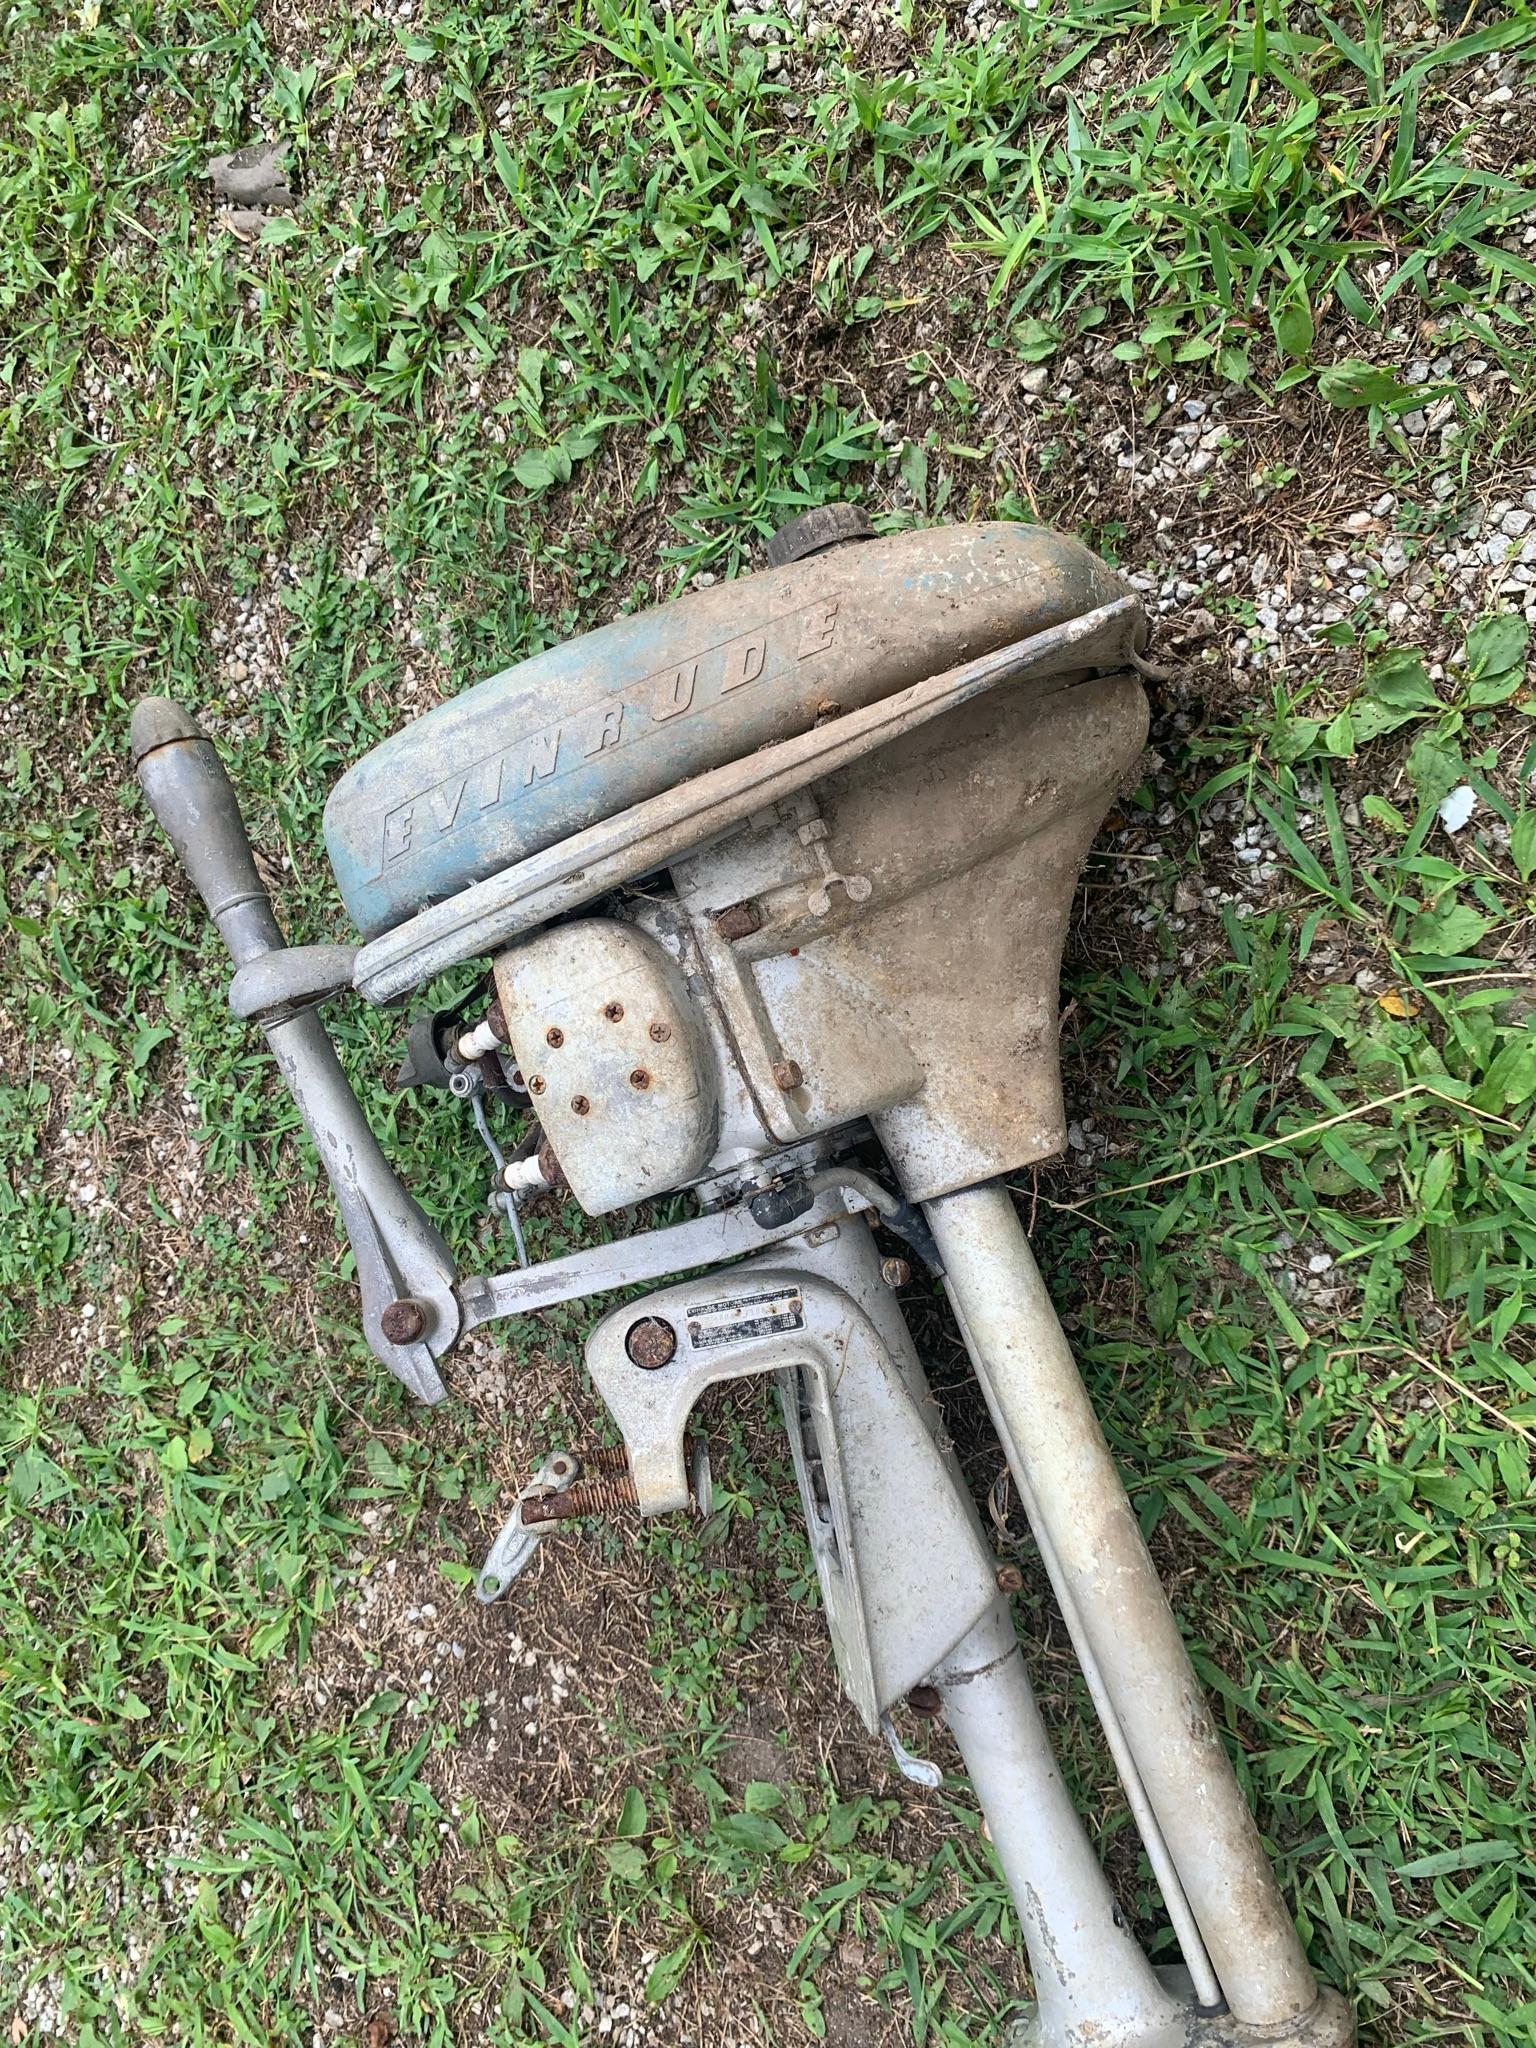 Vintage Evinrude Outboard Motor.  See Photos.